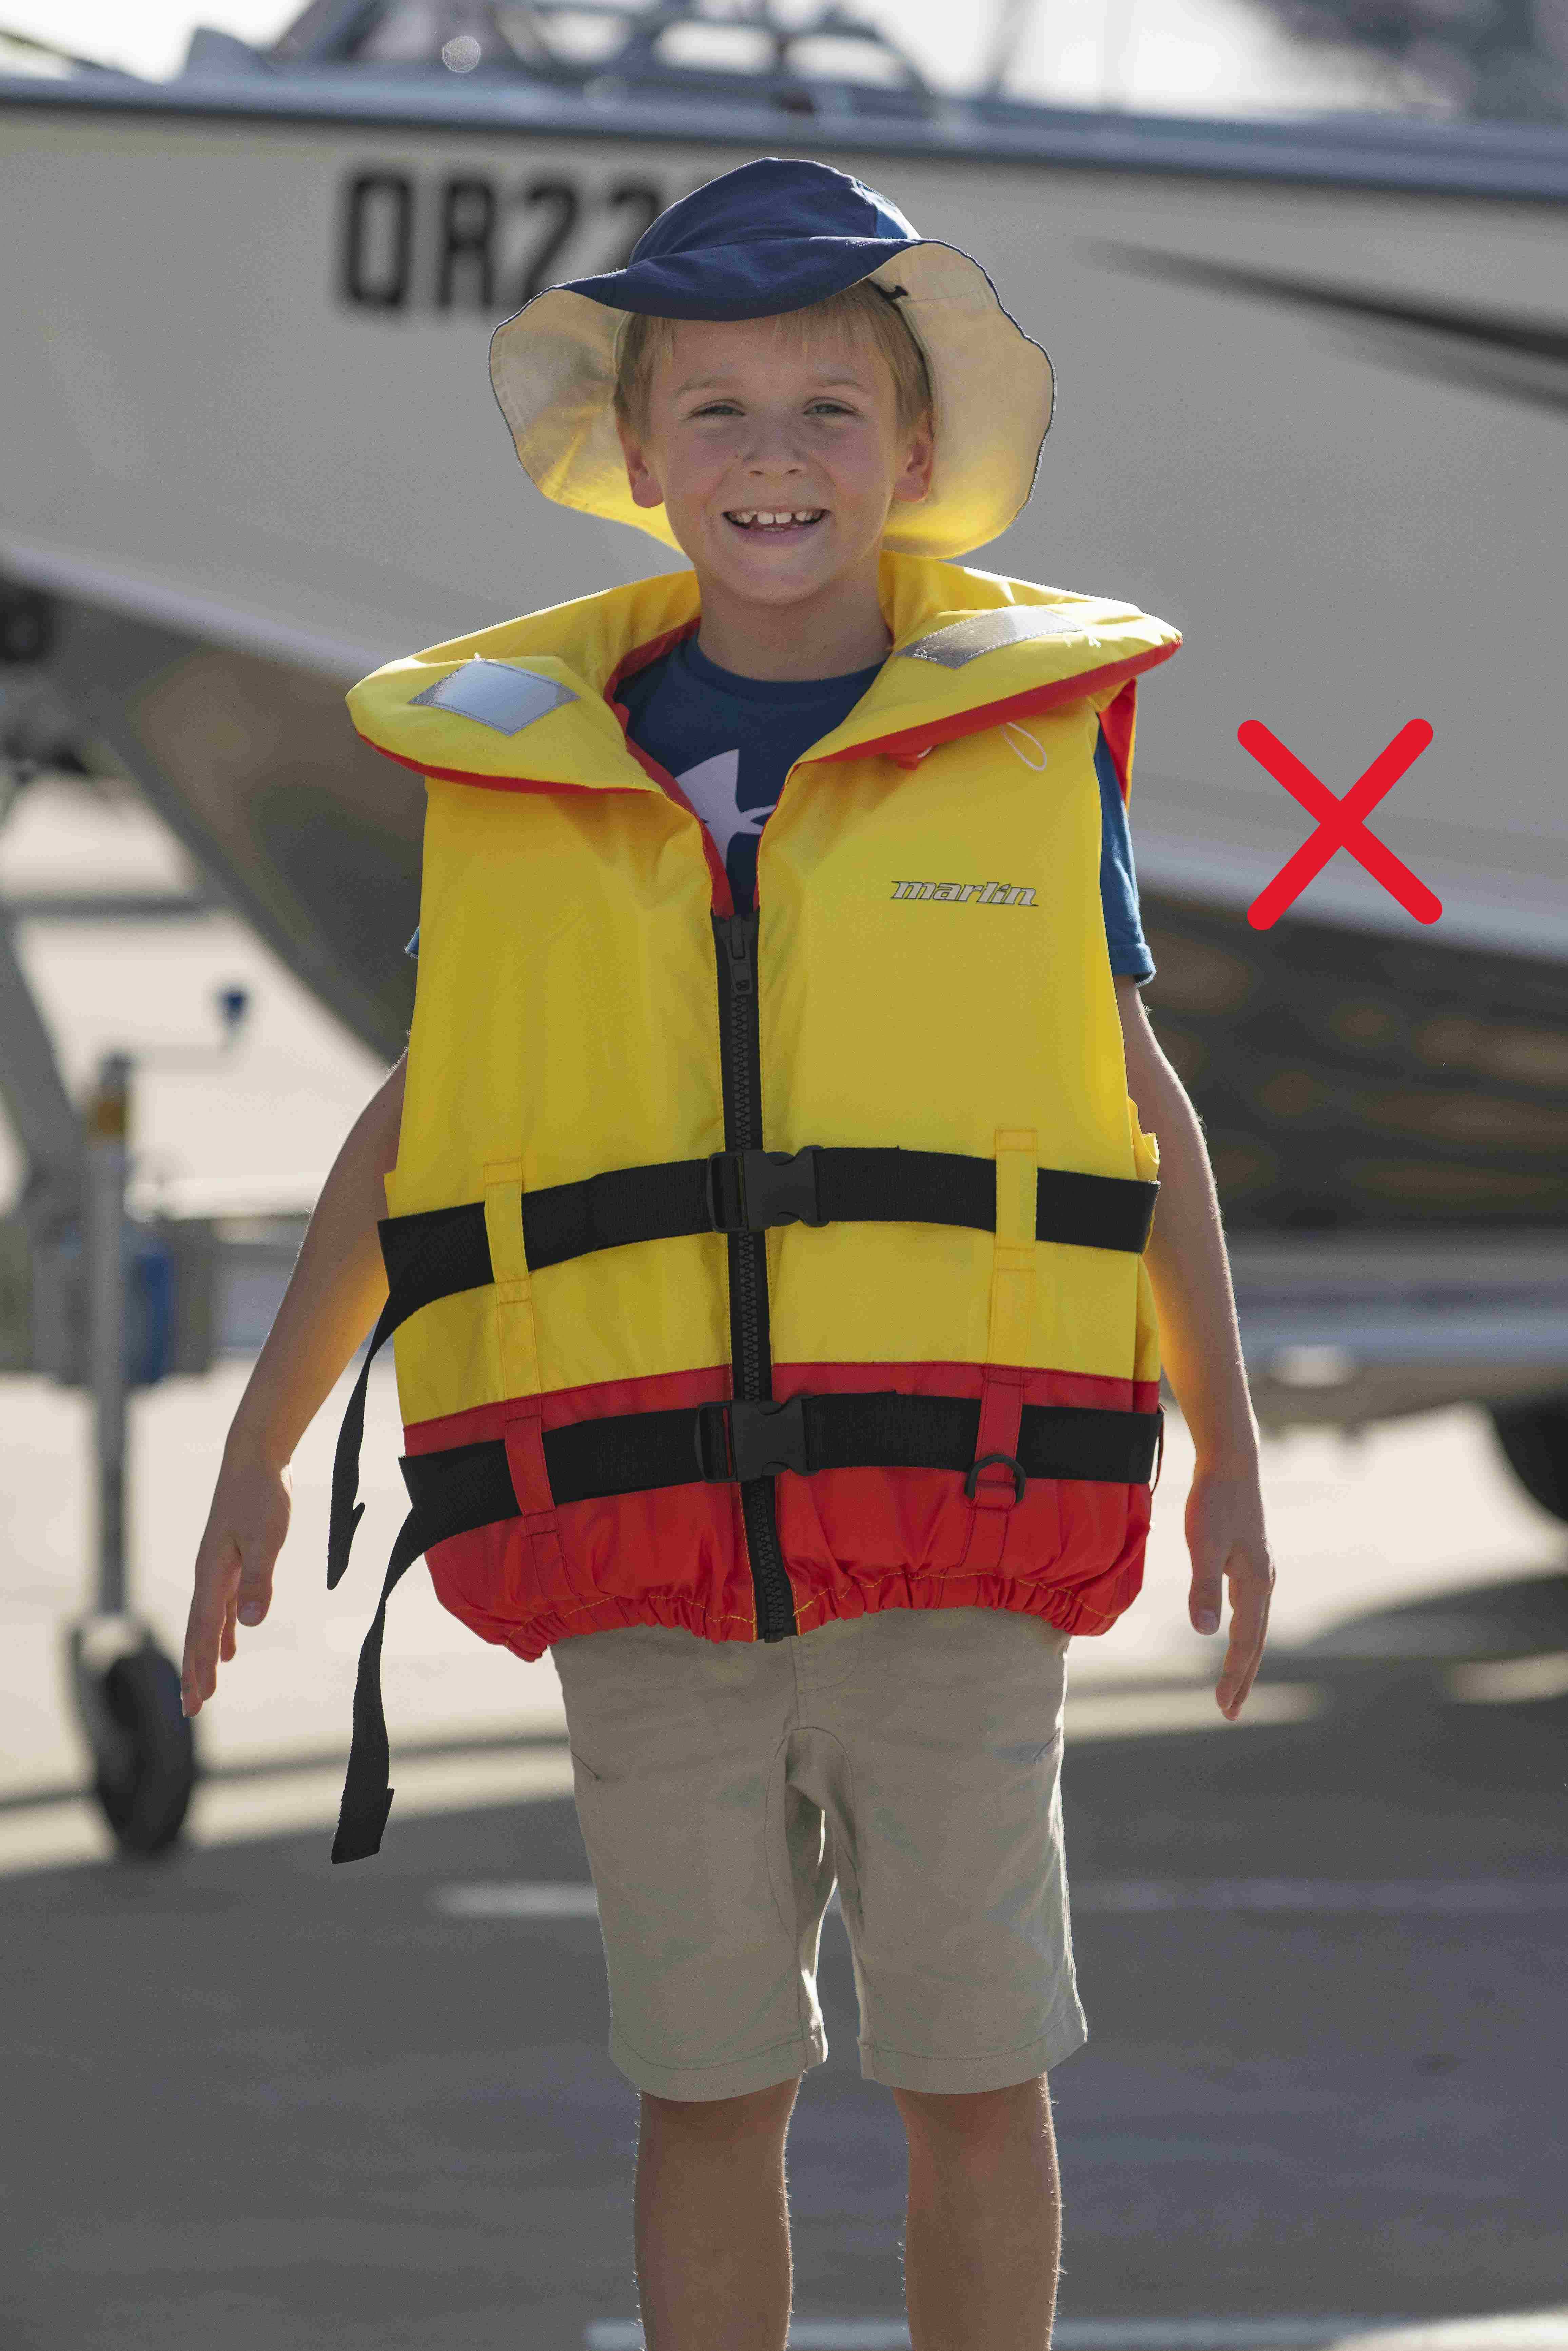 Lifejacket on a child standing up that is too big for the child